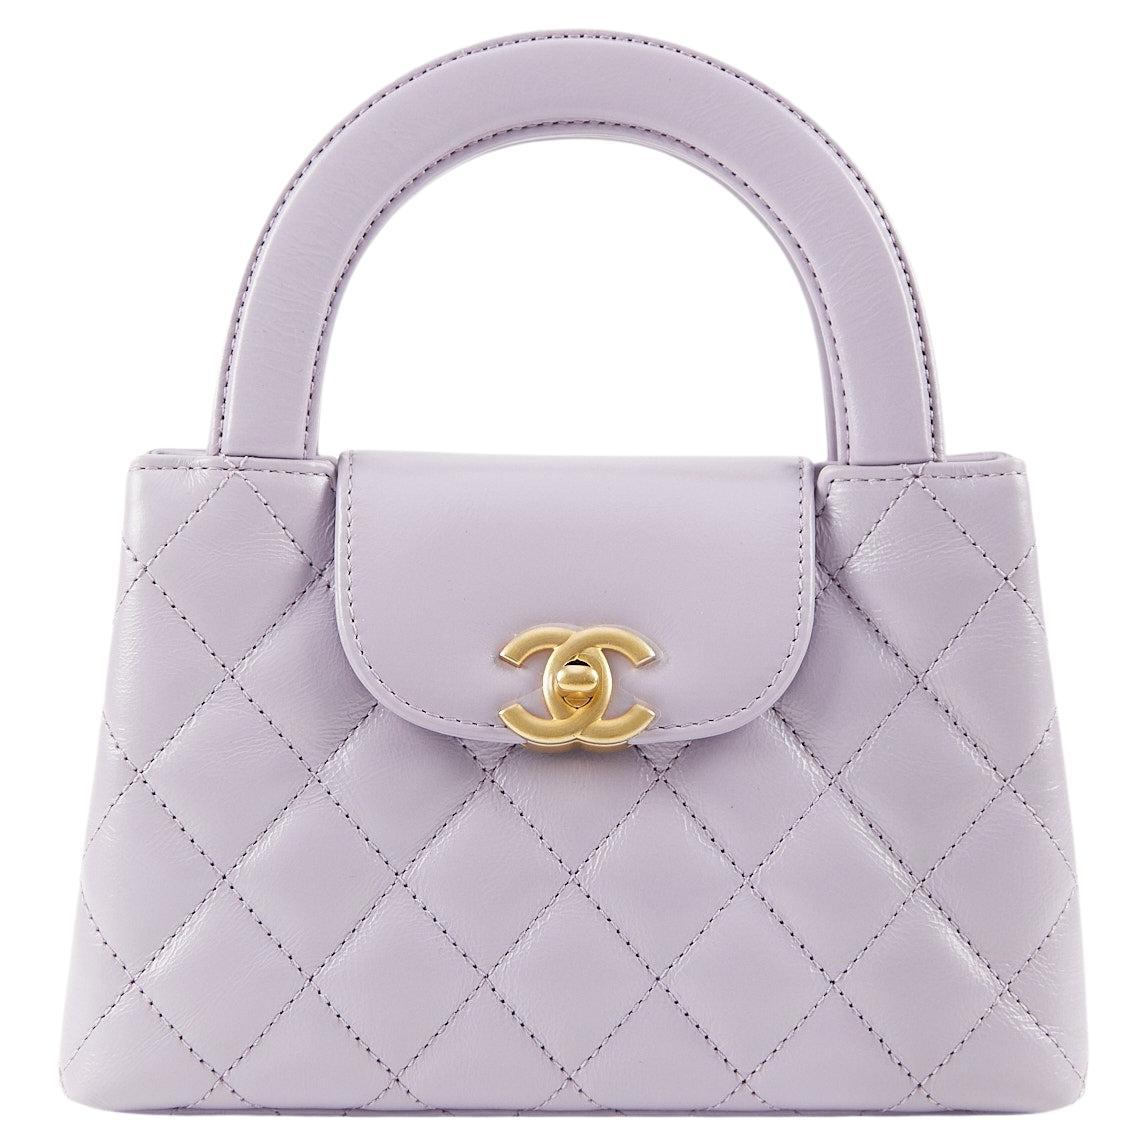 CHANEL SMALL "KELLY" BAG LILAC Aged Calfskin Leather with Gold-Tone Hardware For Sale